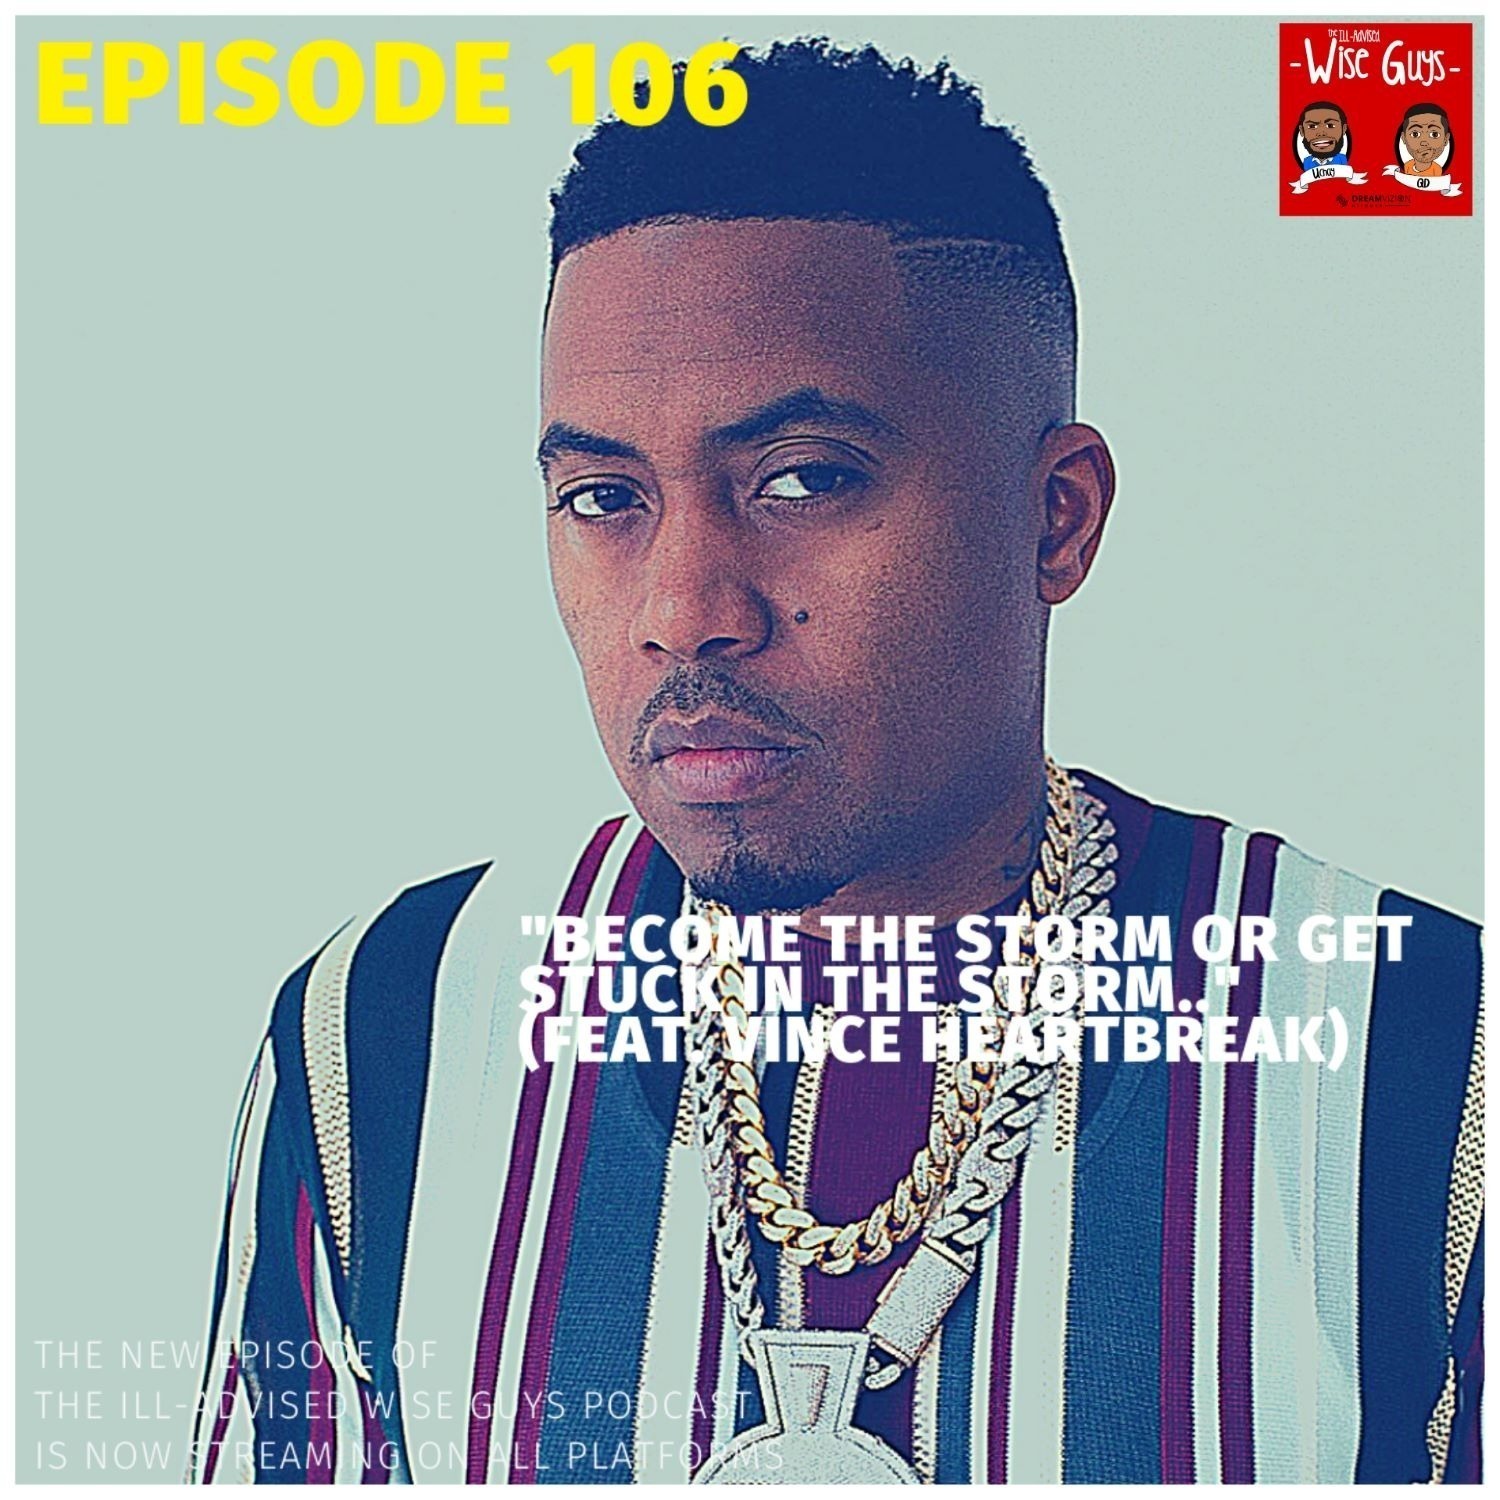 Episode 106 - "Become The Storm or Get Stuck In The Storm..." (Feat. Vince Heartbreak) Image